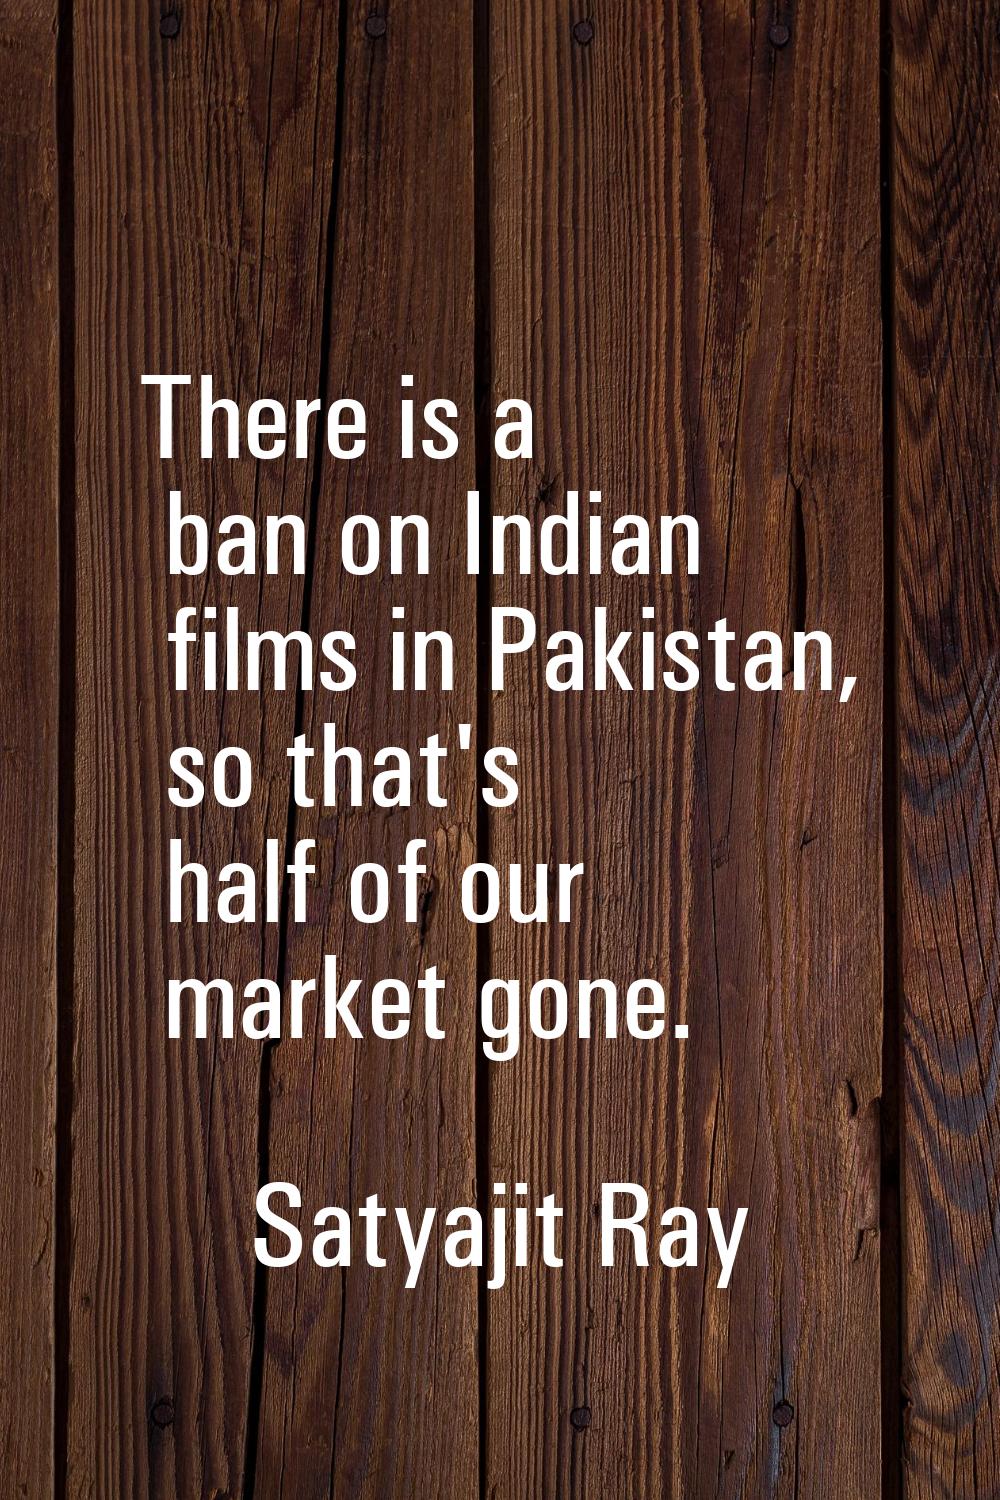 There is a ban on Indian films in Pakistan, so that's half of our market gone.